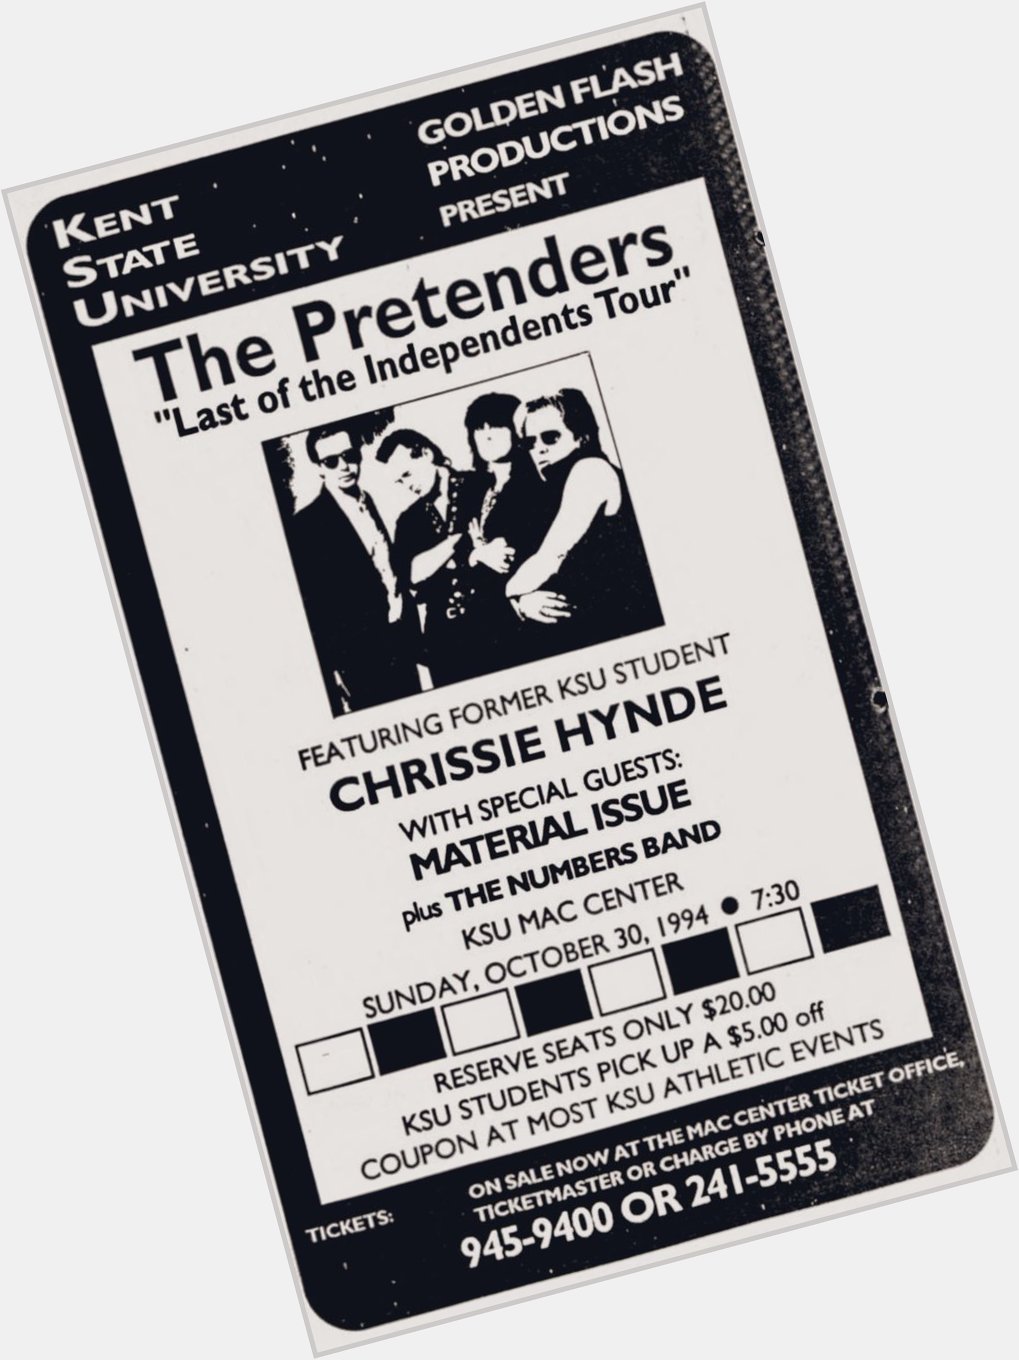 Happy 70th birthday to Chrissie Hynde!

Photo Ad from the Daily Kent Stater October 1994 